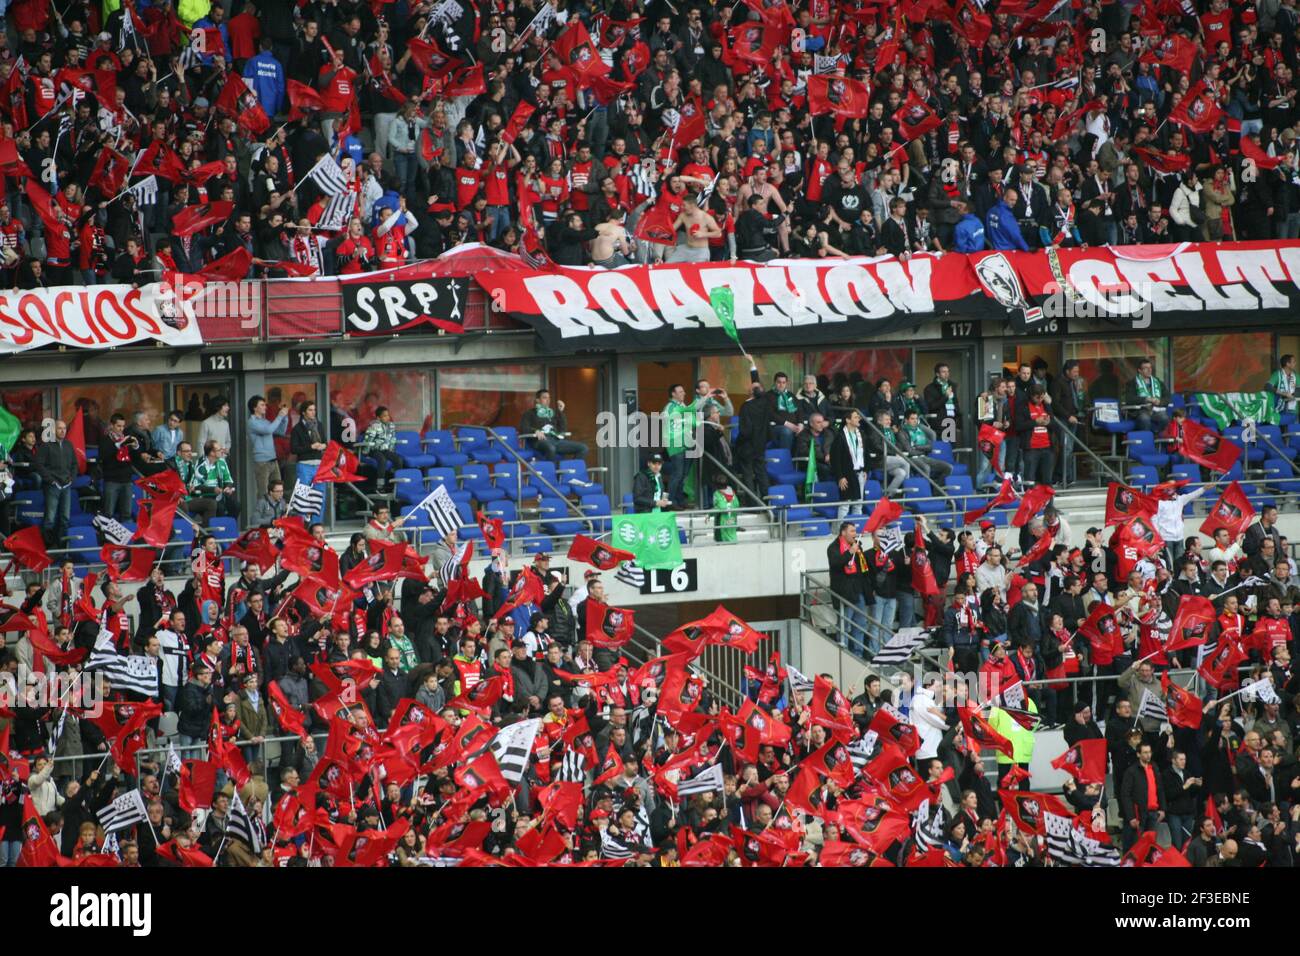 FOOTBALL - FRENCH LEAGUE CUP 2012/2013 - FINAL - AS SAINT ETIENNE v STADE RENNAIS - 20/04/2013 - SAINT DENIS (FRA) - PHOTO DIDIER RAVON / DPPI - FANS RENNES IN STAND OF STADE DE FRANCE DURING THE MATCH Stock Photo